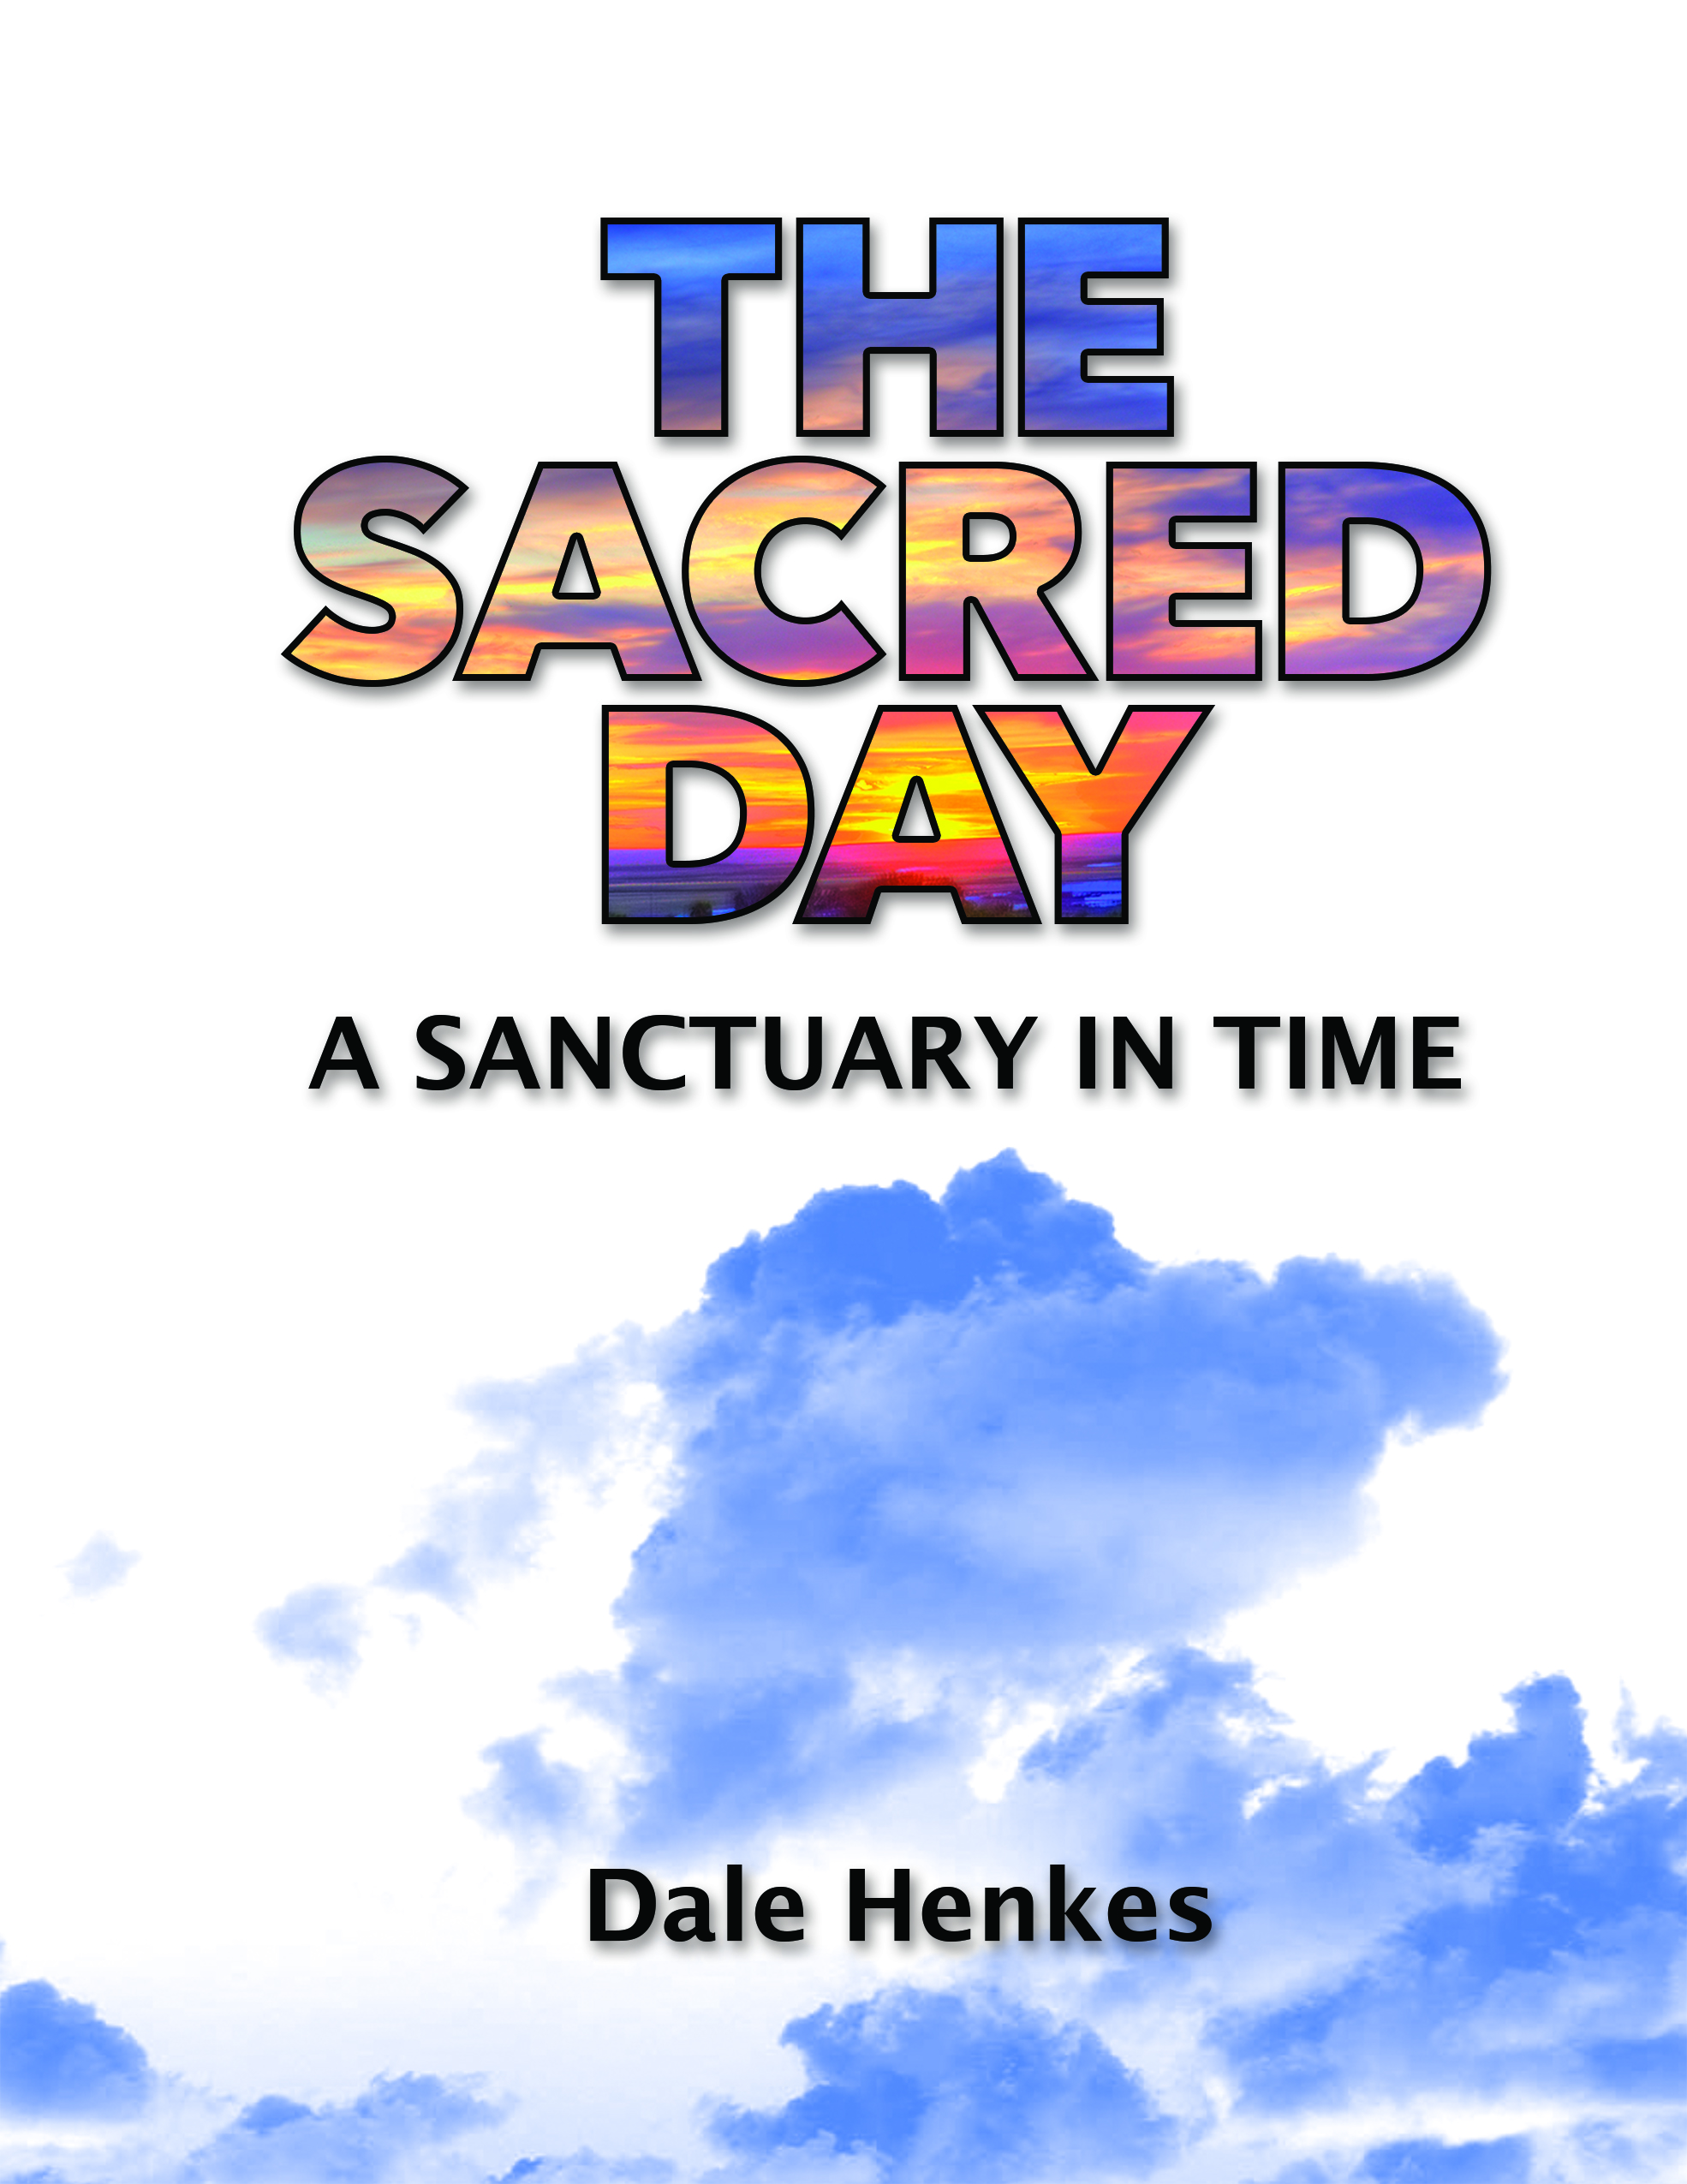 The Sacred Day: A Sanctuary in Time